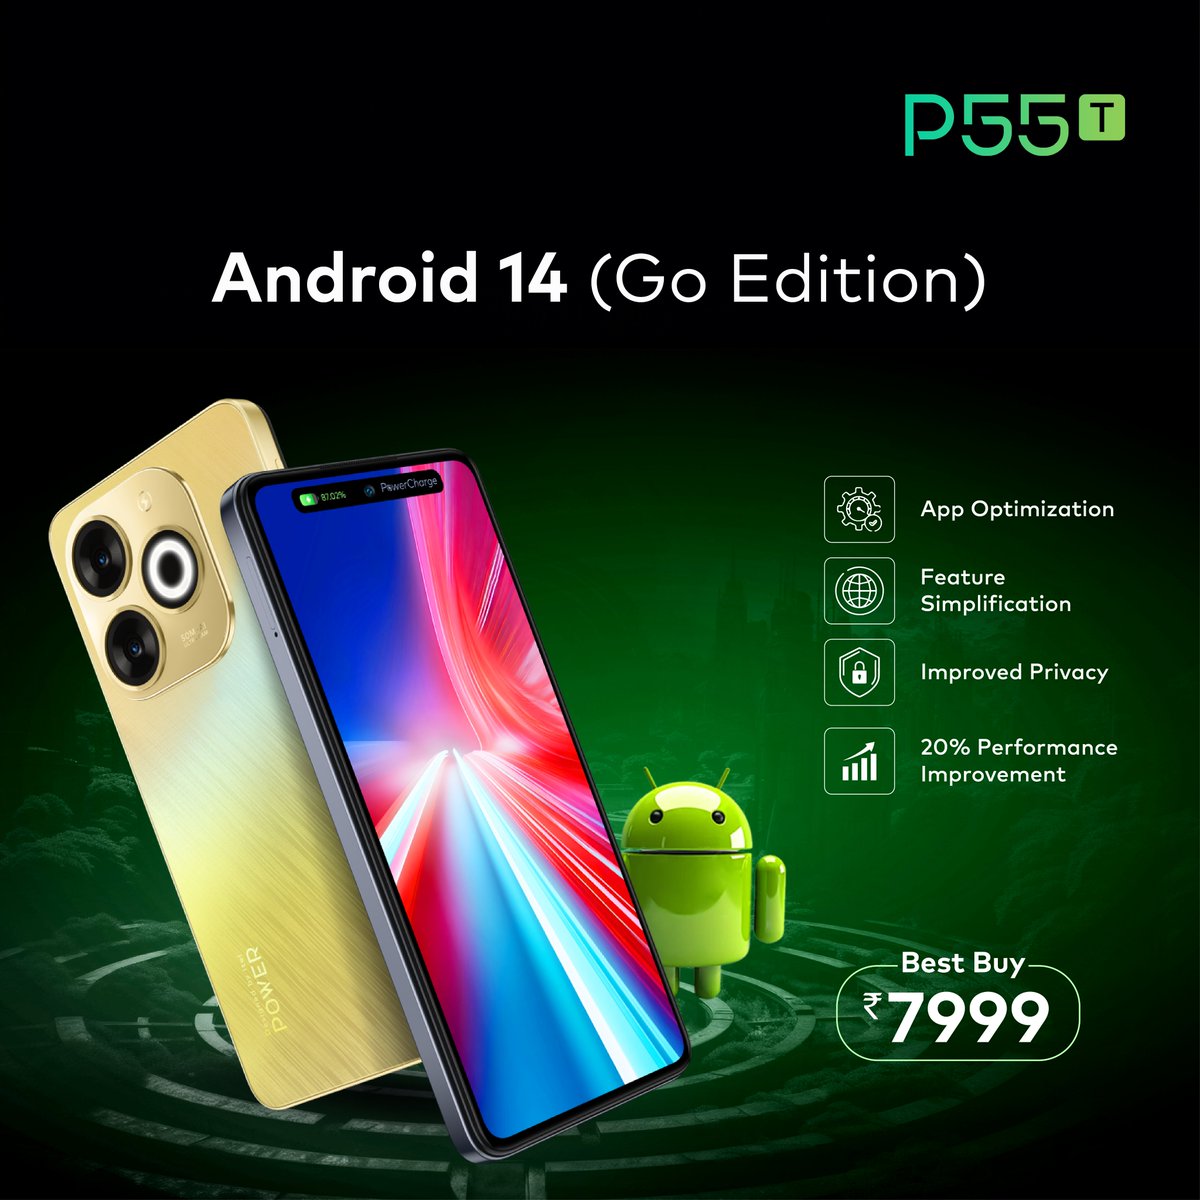 Go for something smarter, just like the Android 14 (Go Edition) operating system of itelP55T. Get improved privacy and better performance at just Rs 7999. Available at your nearest retail outlet. #enjoybetterlife #P55T #itelSmartphone